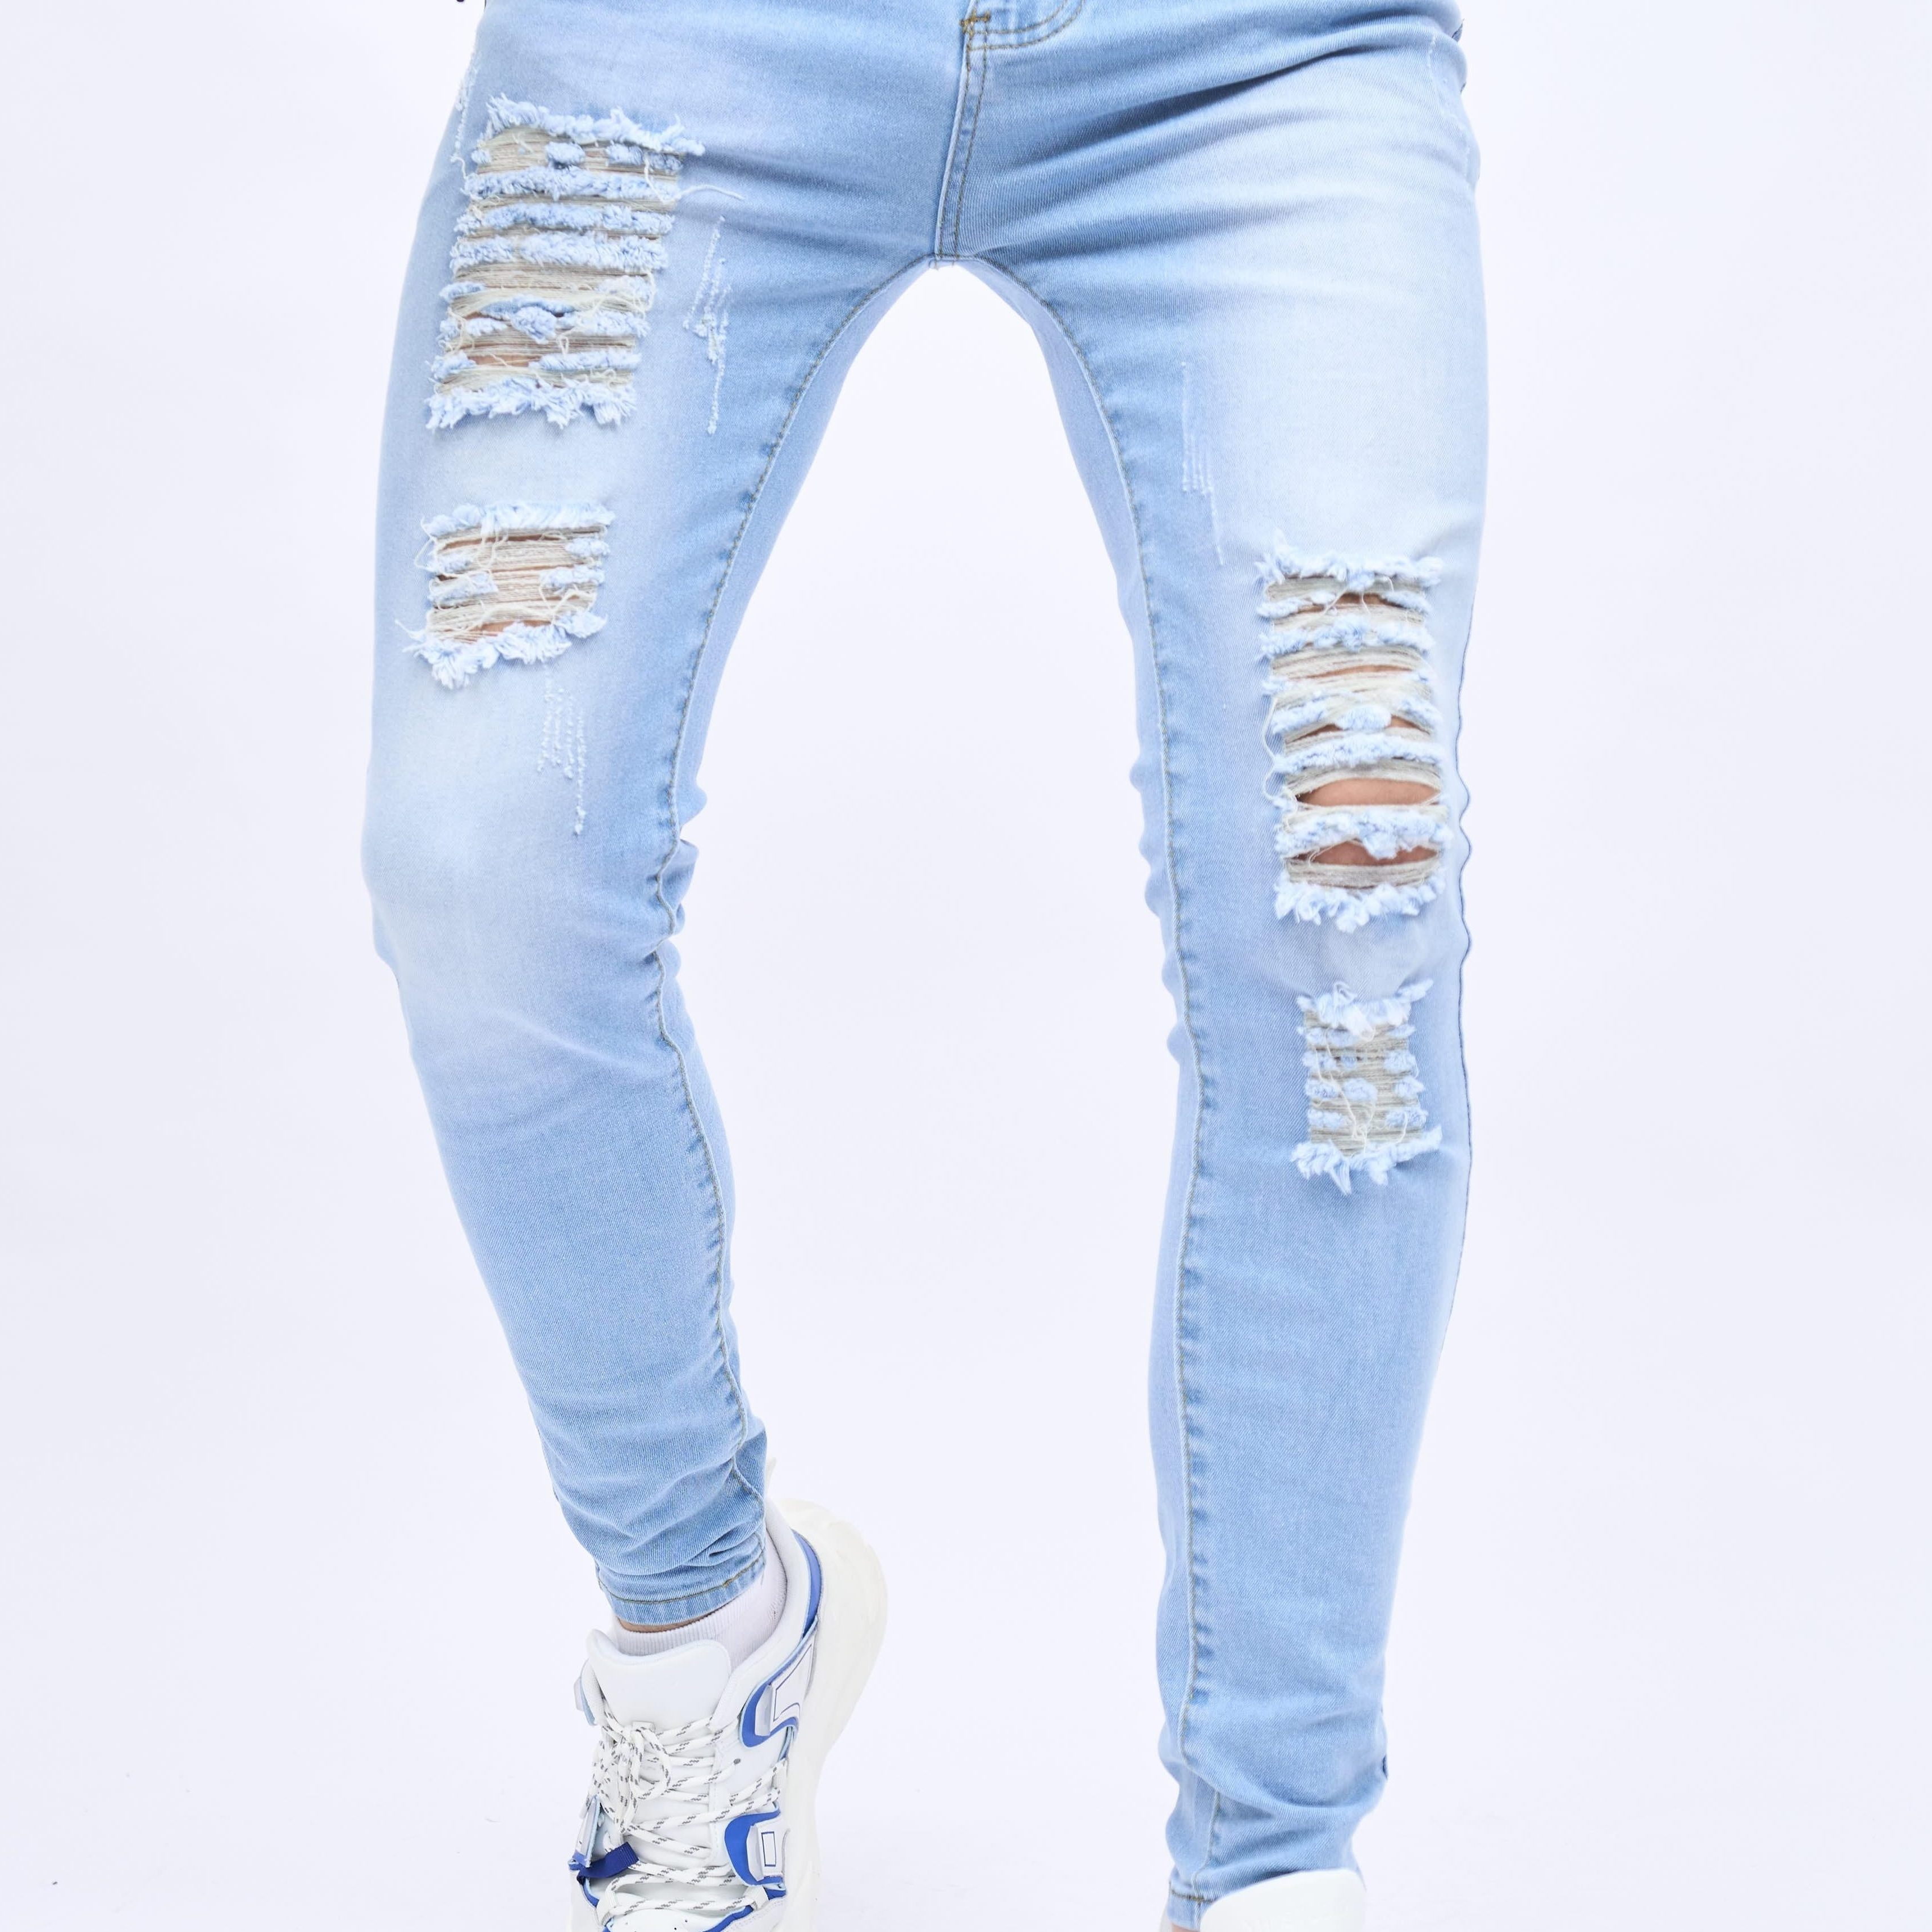 

2023 Retro Distressed Knee Ripped Jeans Slim Small Feet Light Blue Cotton Jeans